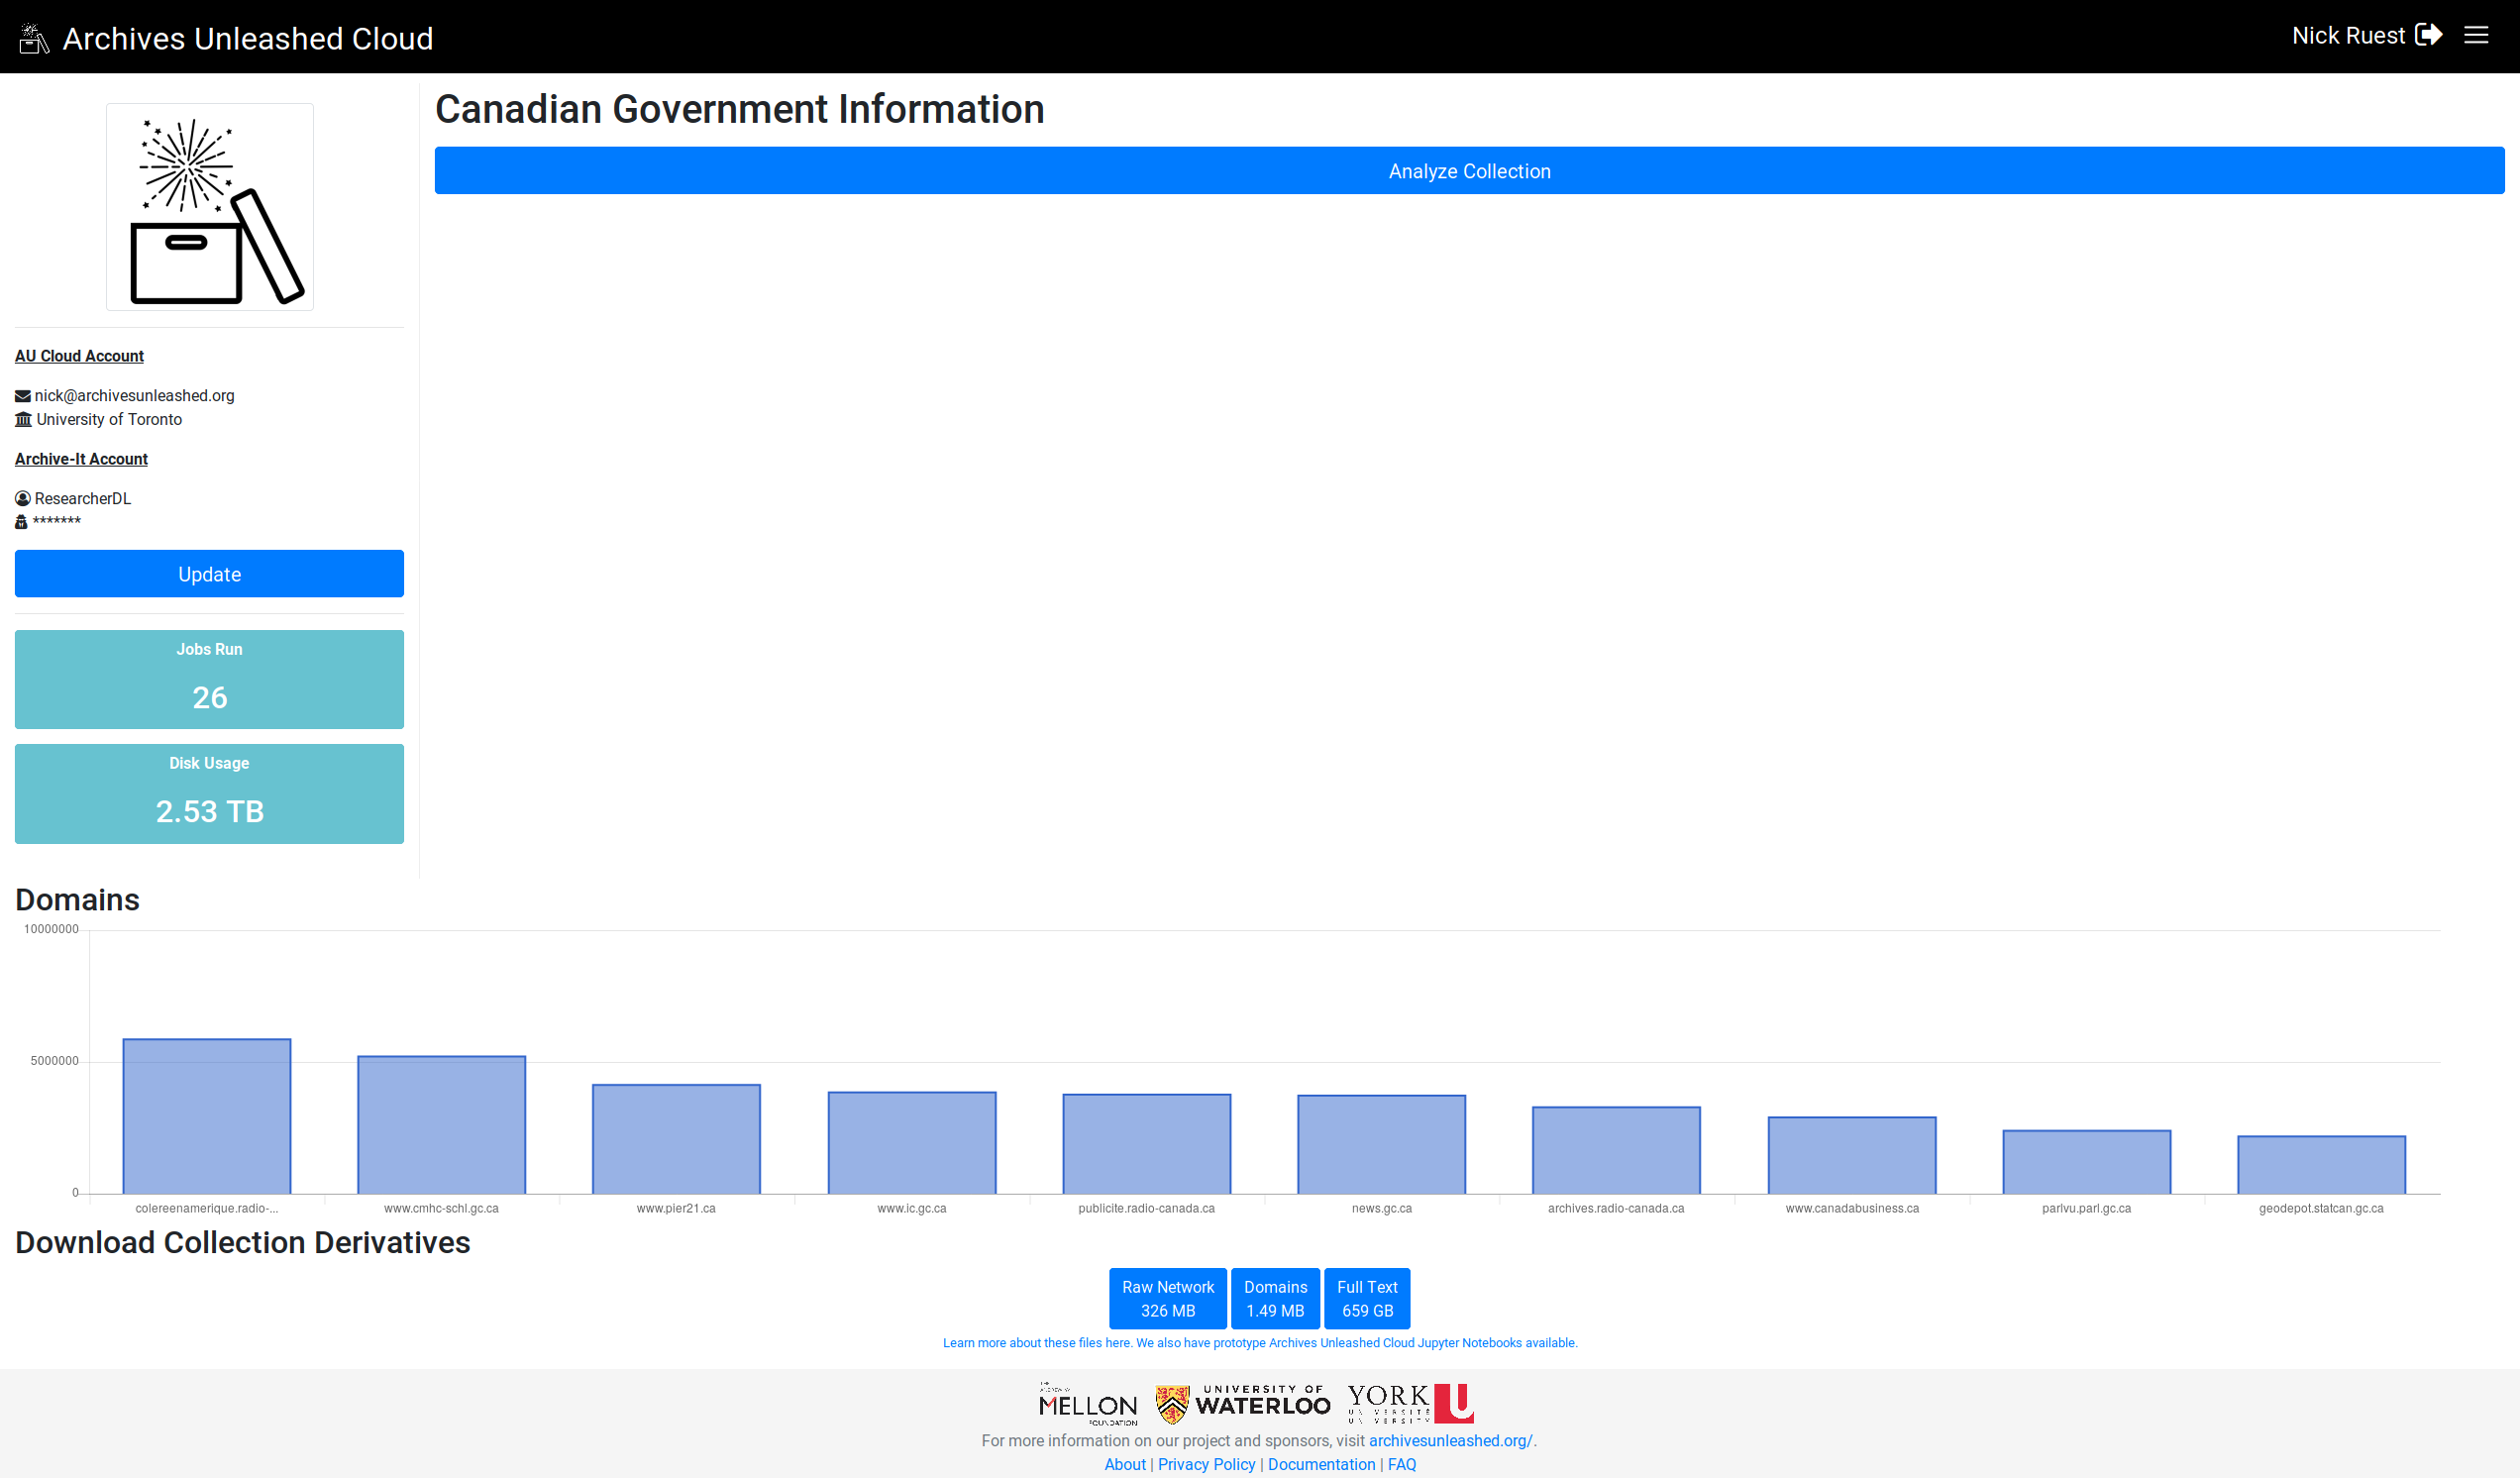 Screenshot_2019-05-02 Canadian Government Information Archives Unleashed